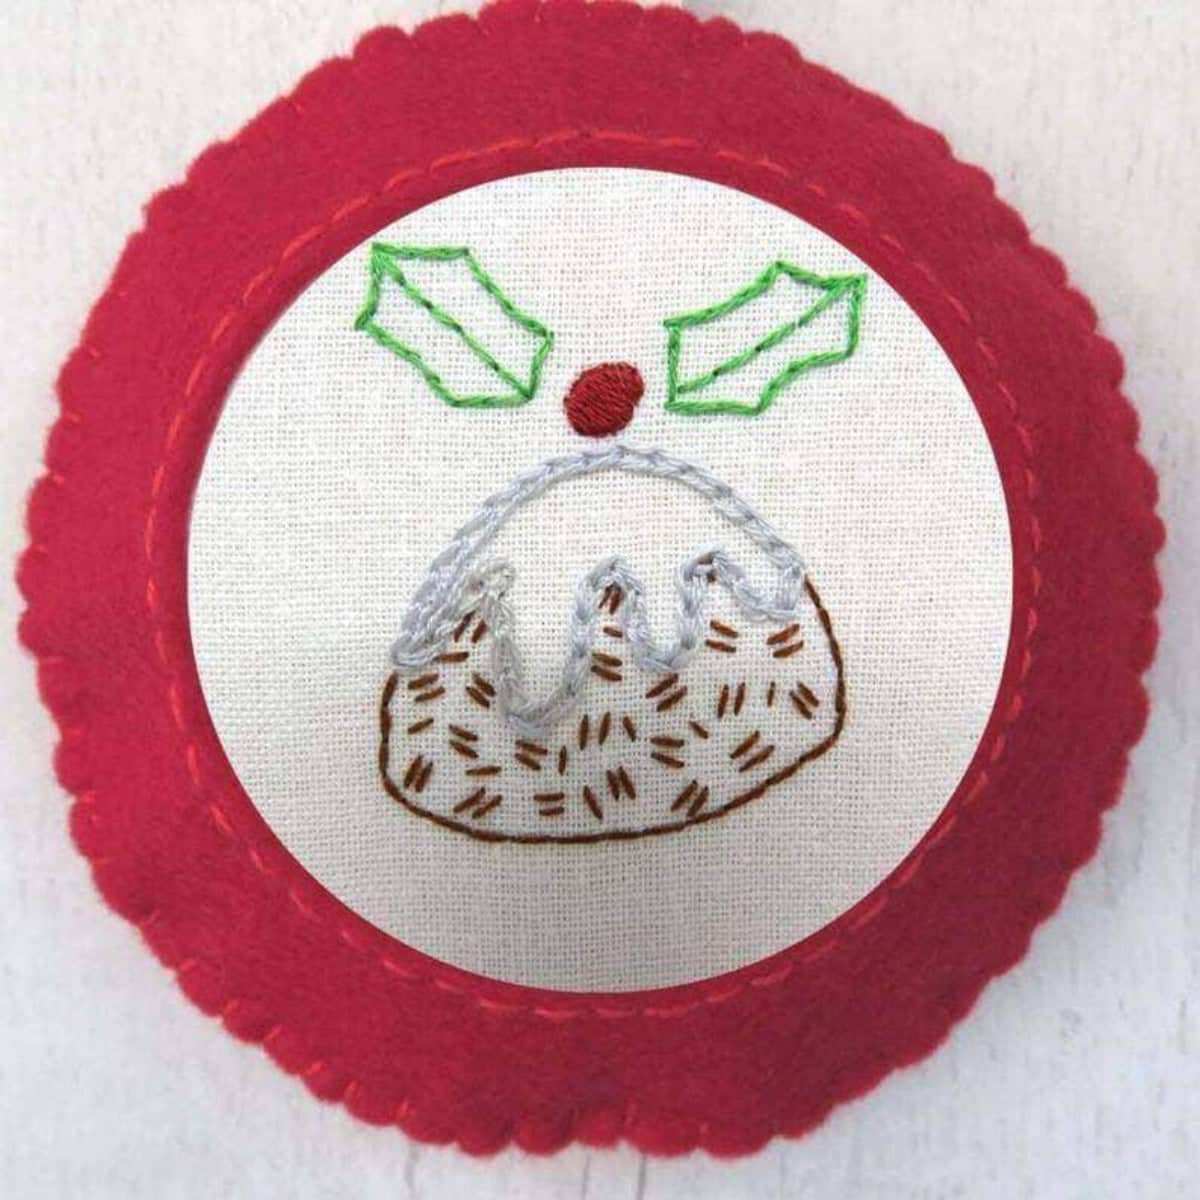 Christmas Hand Embroidery decorations , PDF Download , StitchDoodles , christmas, Embroidery, embroidery hoop, embroidery hoop kit, Embroidery Kit, embroidery kit for adults, embroidery kit fro beginners, embroidery kits for adults, embroidery kits for beginners, embroidery pattern, hand embroidery fabric, hand embroidery seat frame, modern embroidery kits, nurge embroidery hoop, Printed Pattern , StitchDoodles , shop.stitchdoodles.com